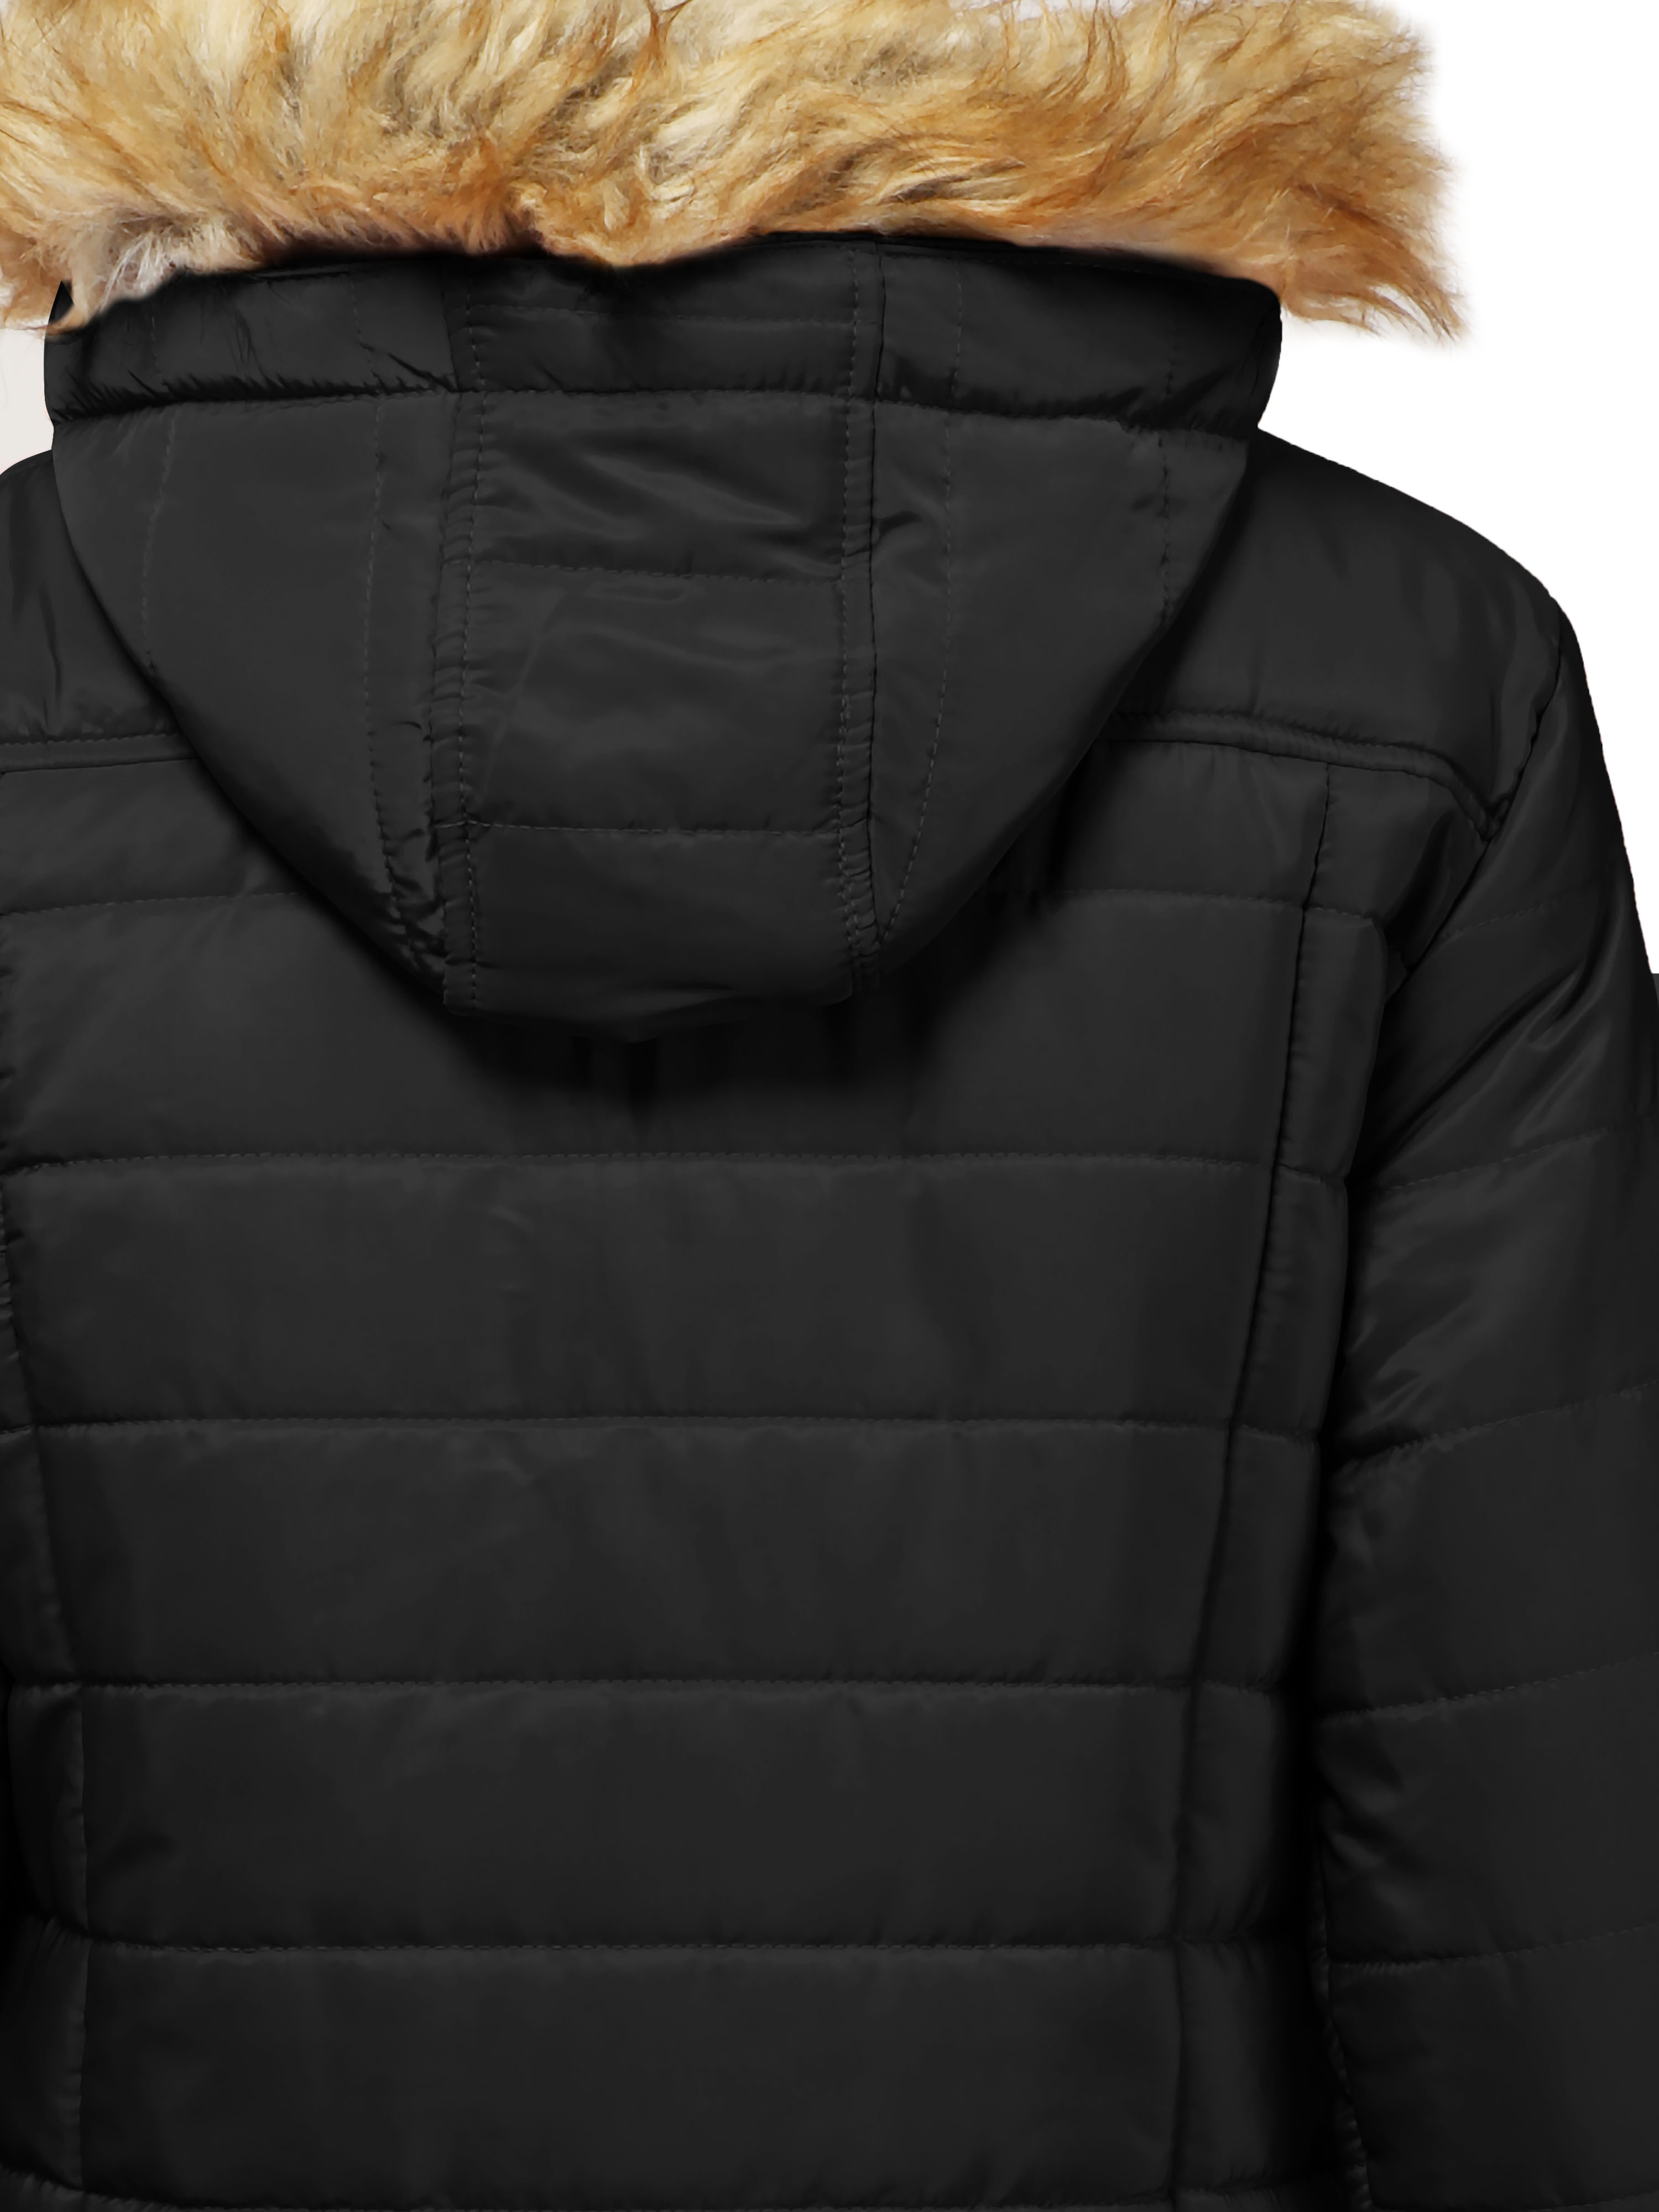 Hat and Beyond Womens Premium Lightweight Puffer Jacket with Detachable Fur Hood Padded Outerwear